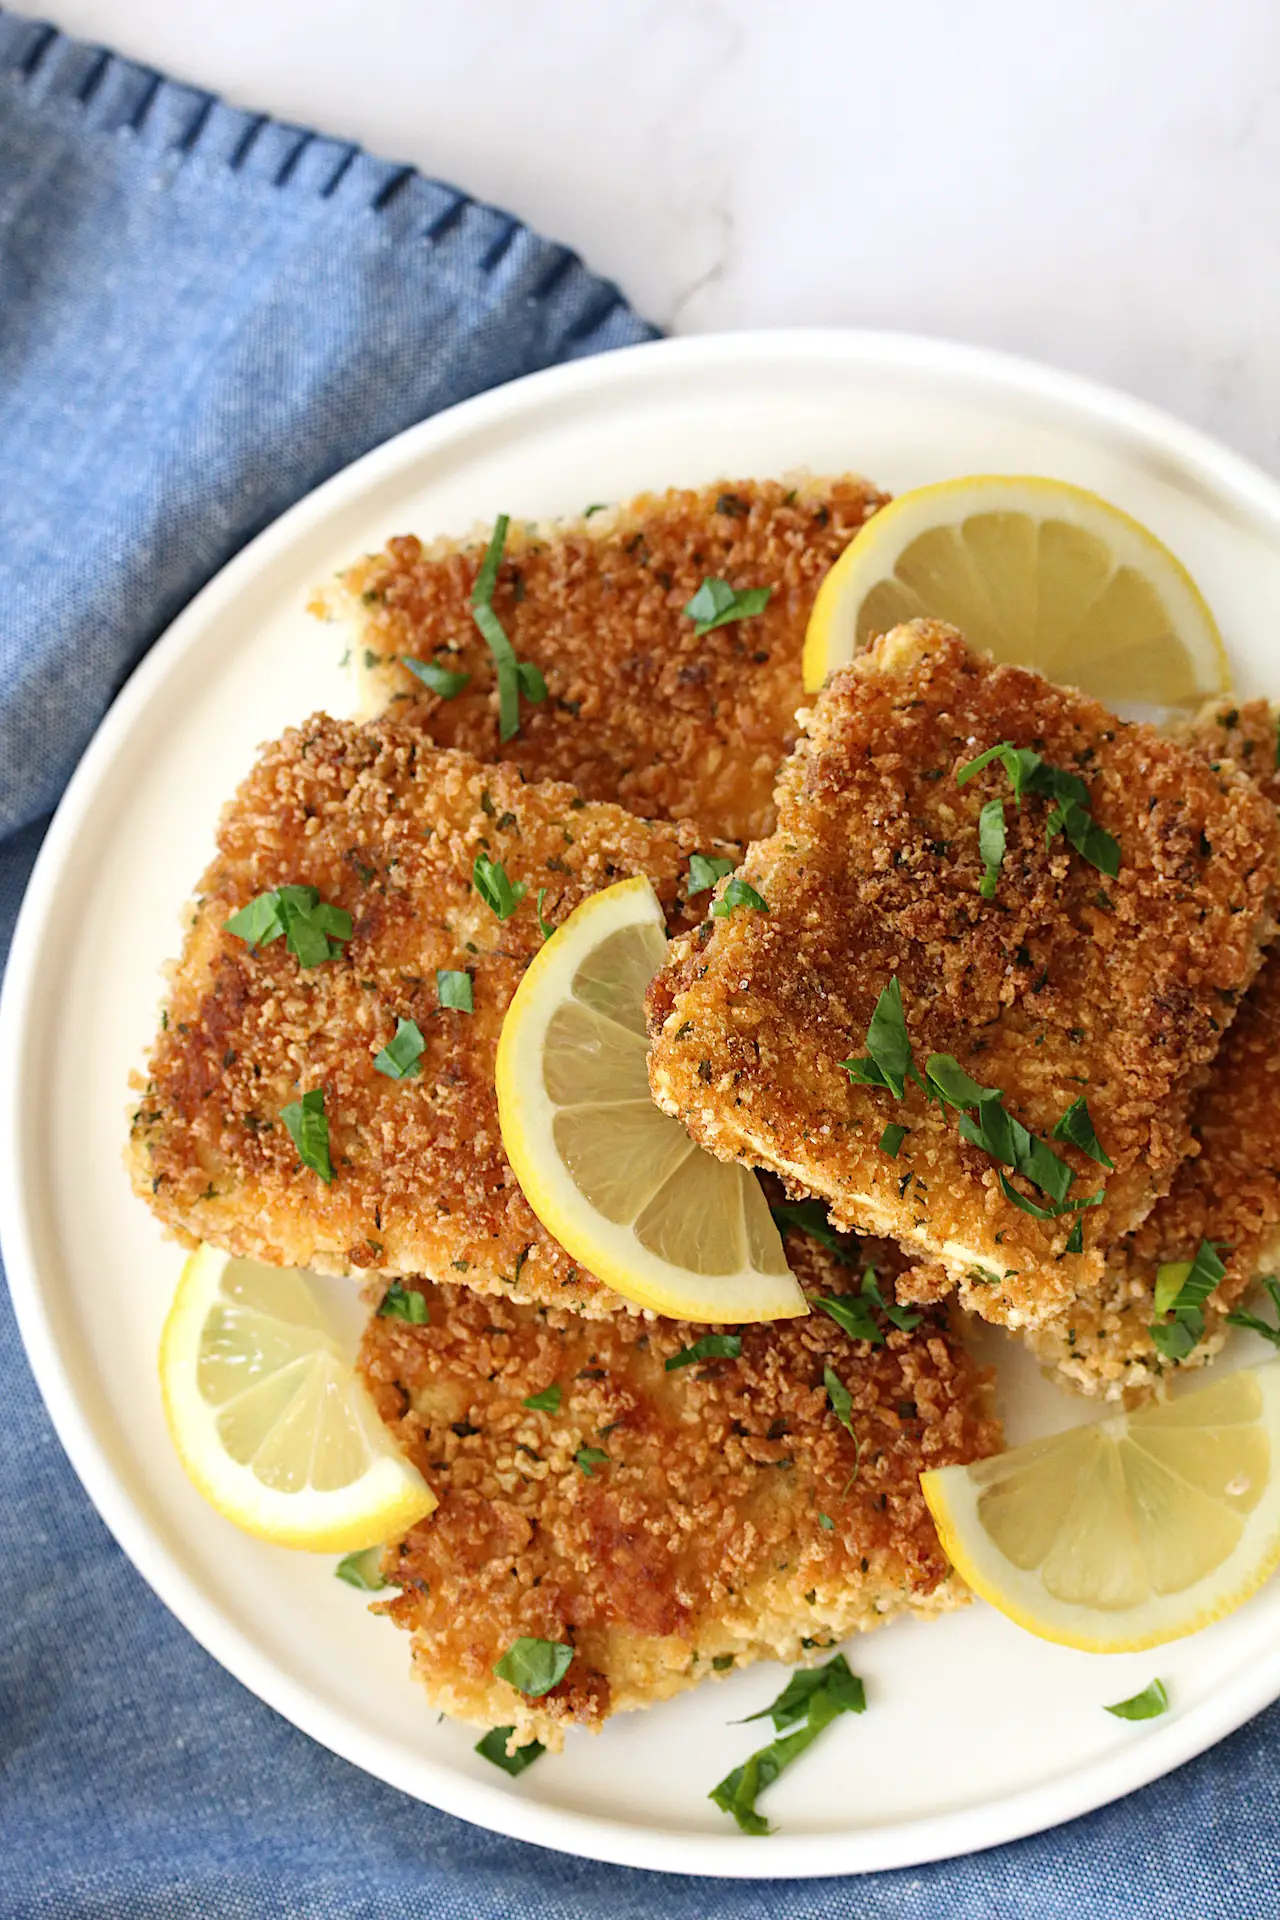 Vegan gluten-free tofu schnitzel on a plate with parsley and slices of lemon